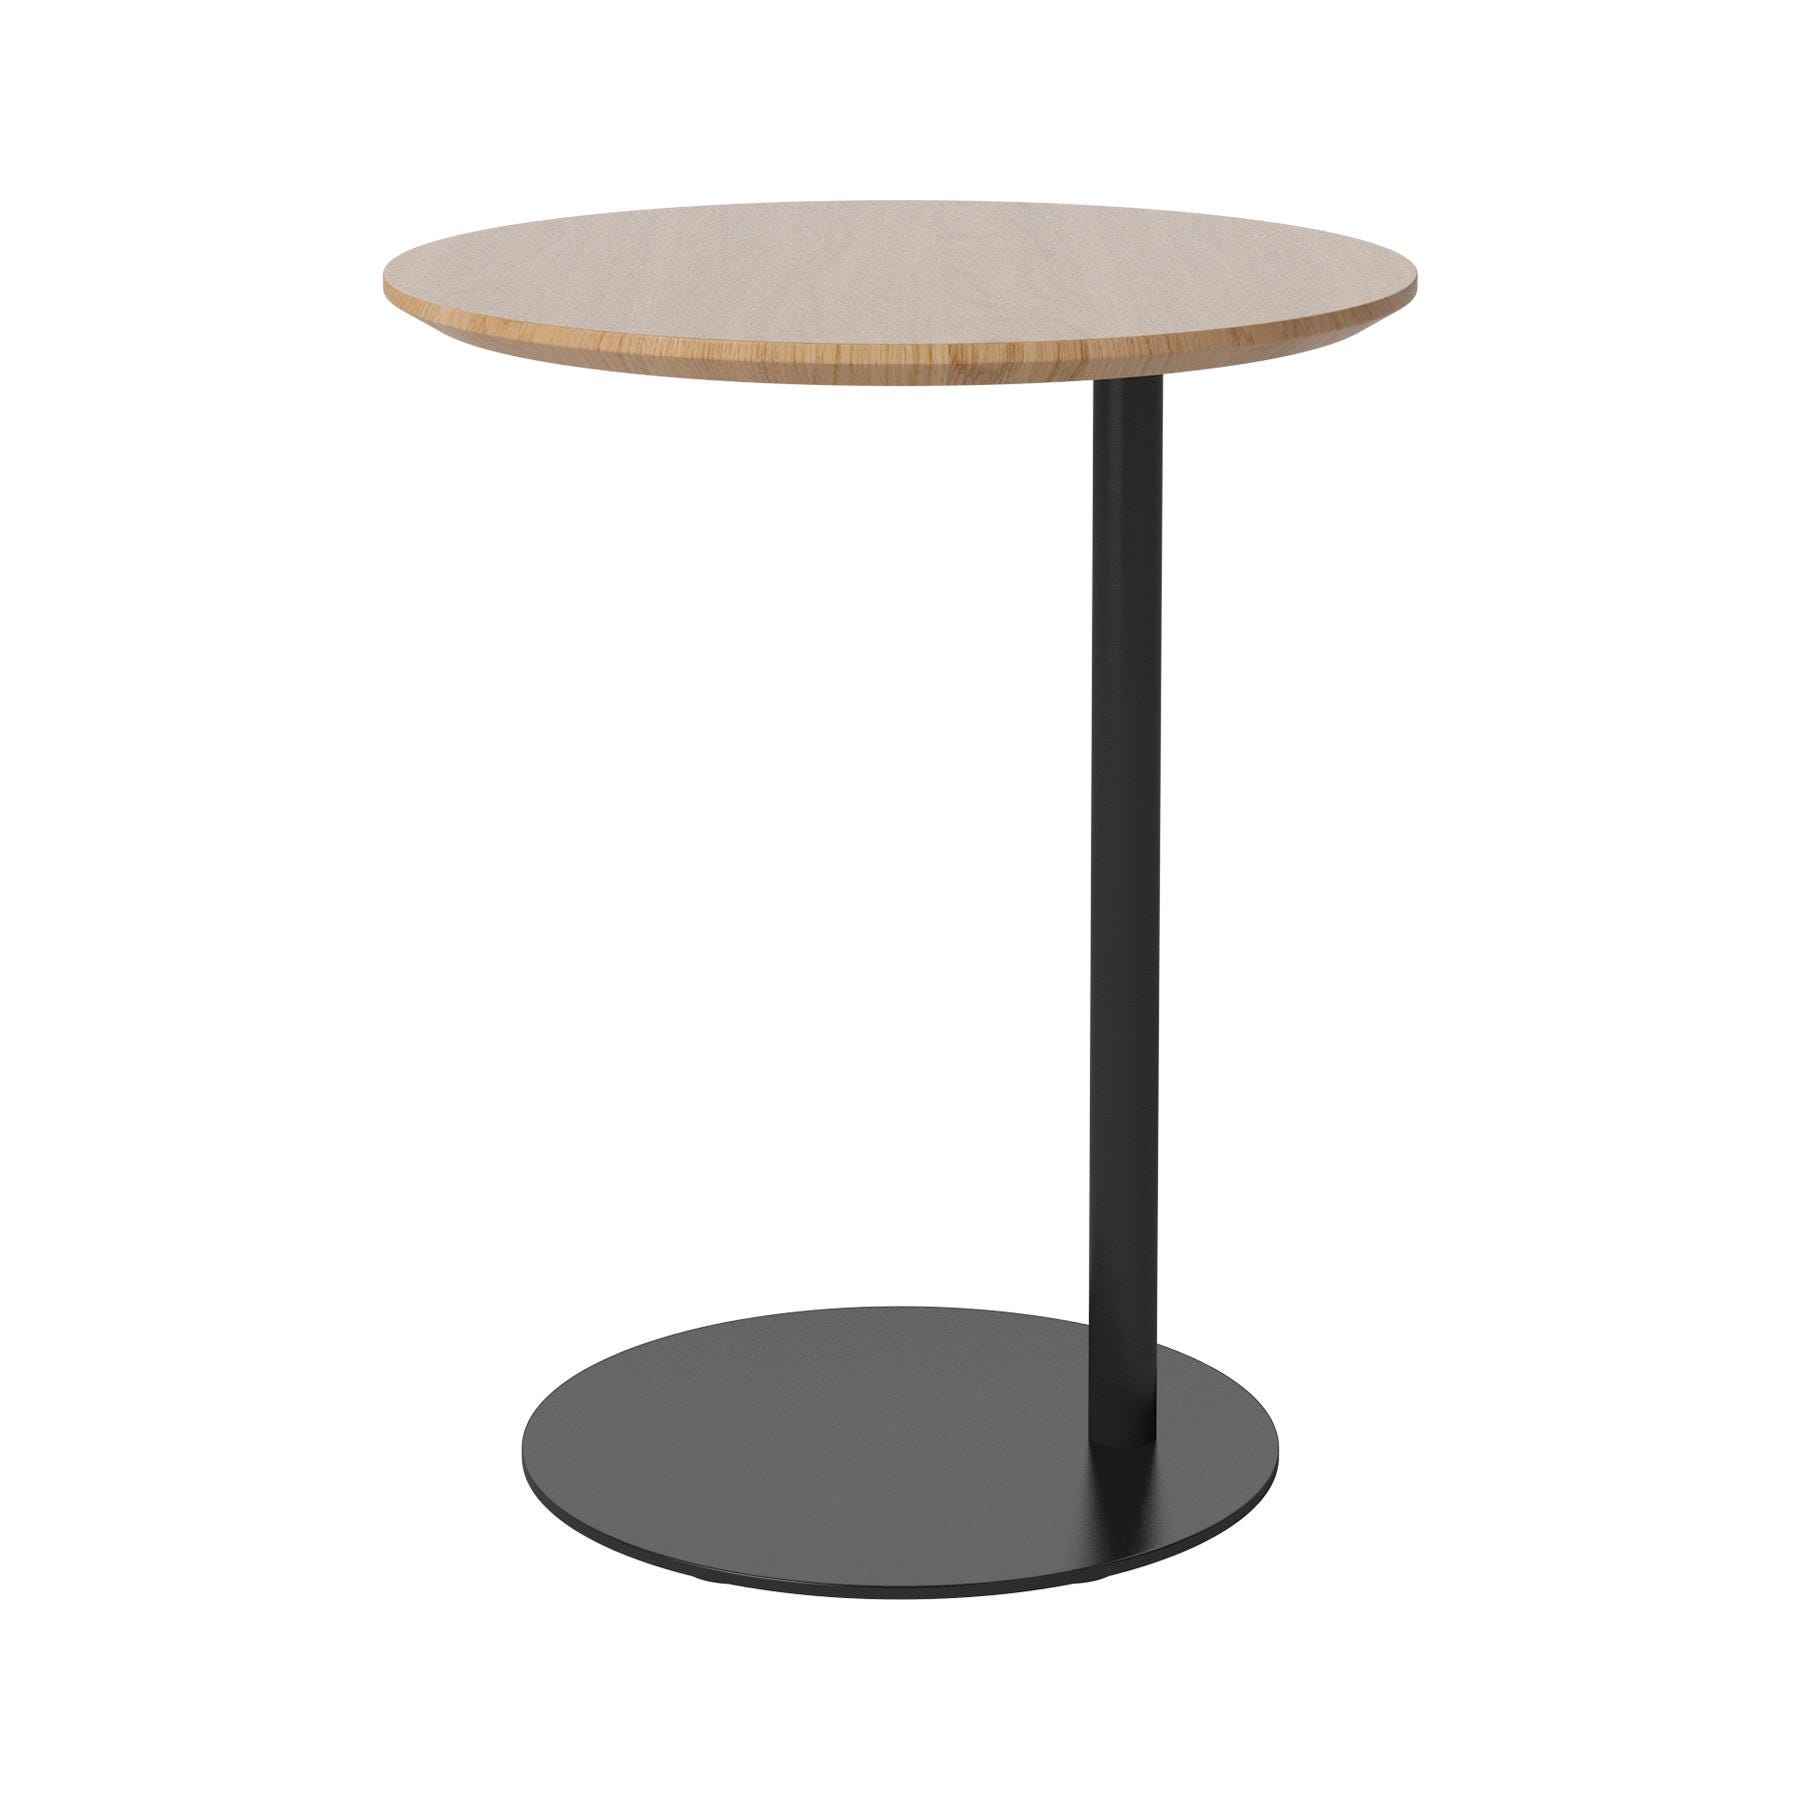 Bolia Pillar Side Table Oiled Oak Black Lacquered Steel Light Wood Designer Furniture From Holloways Of Ludlow